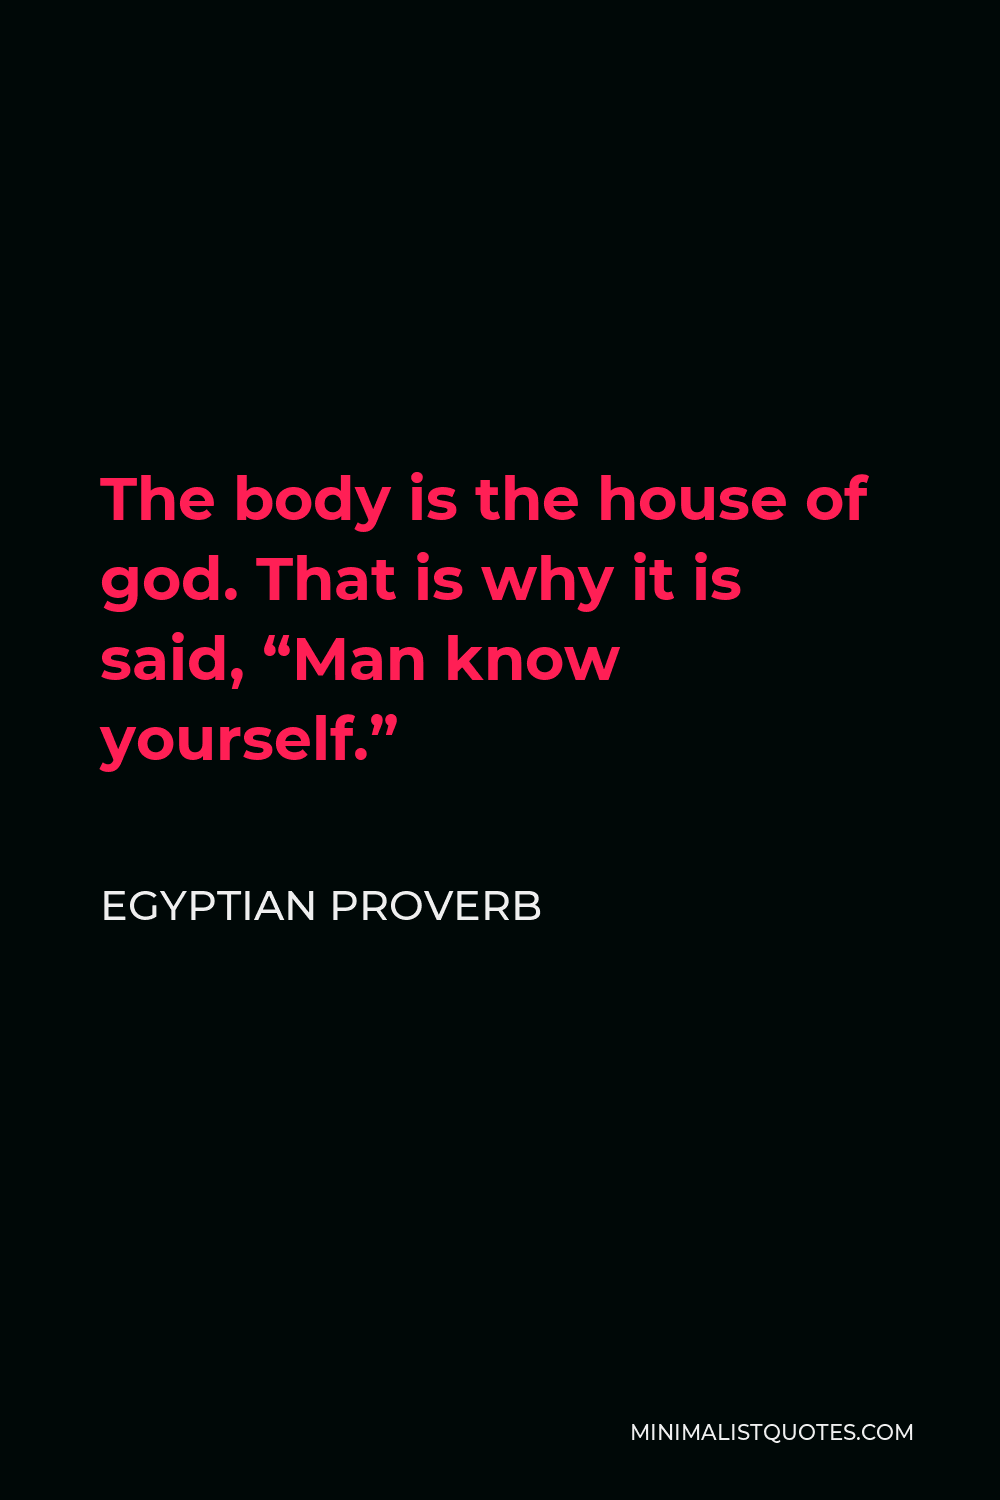 Egyptian Proverb Quote - The body is the house of god. That is why it is said, “Man know yourself.”